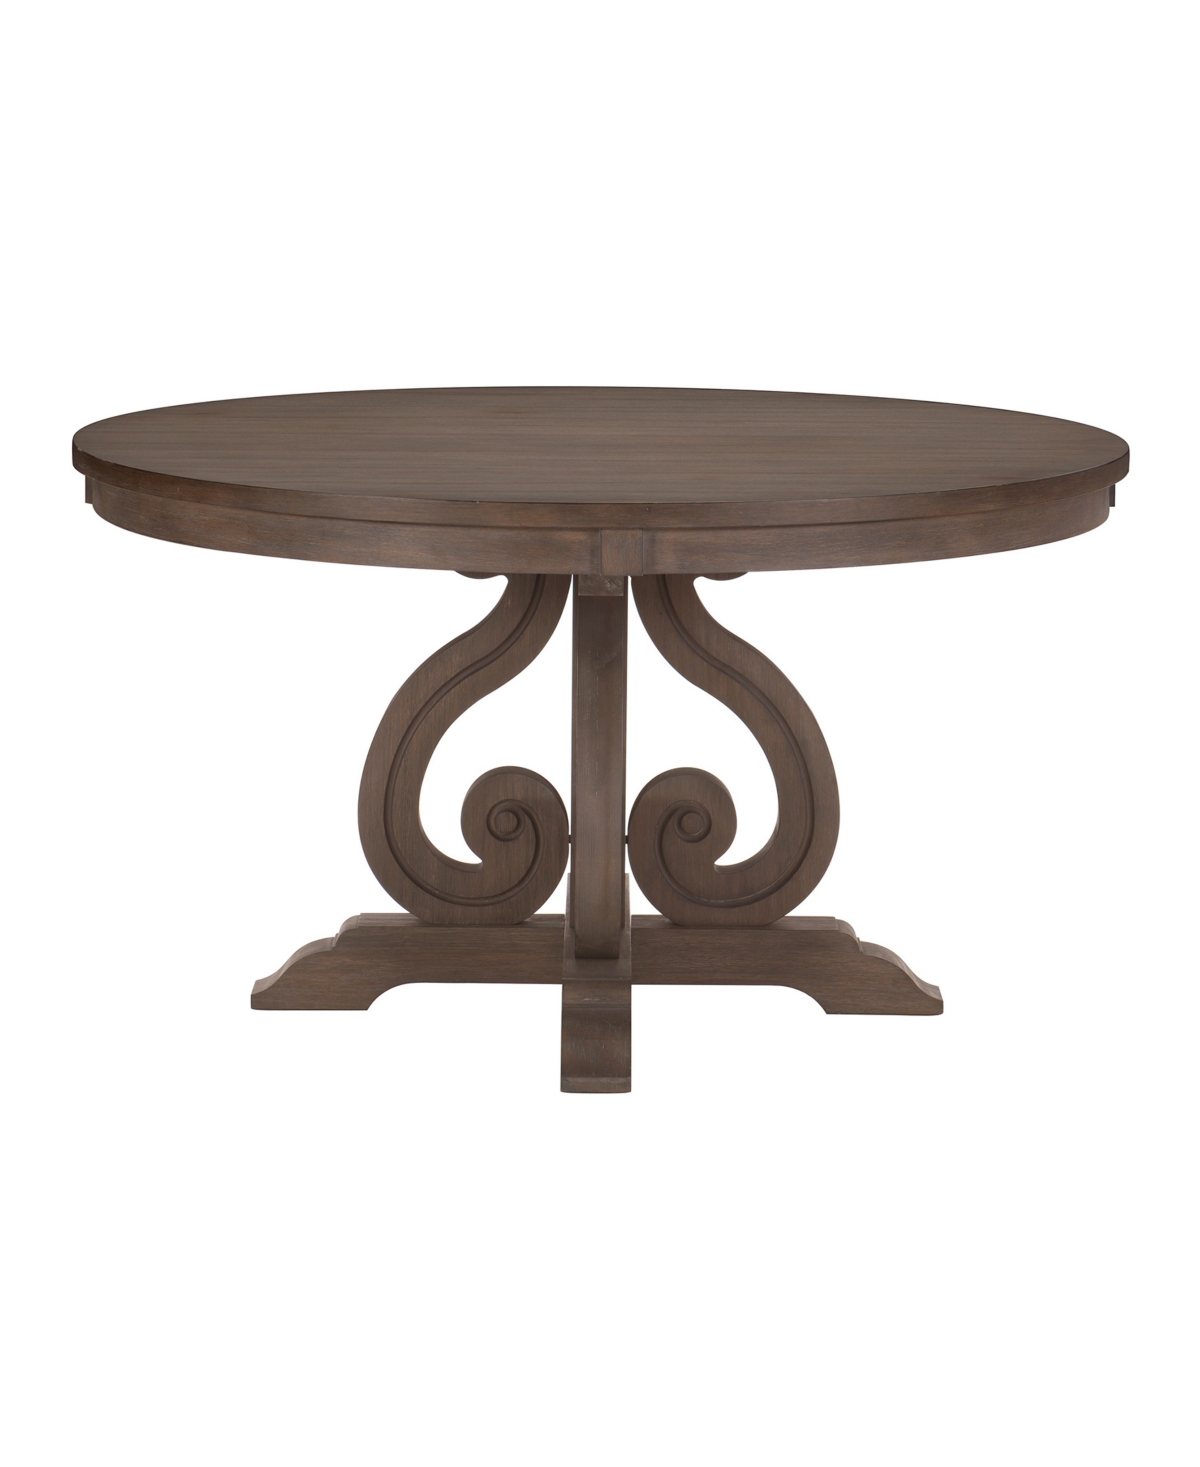 Huron Round Dining Table